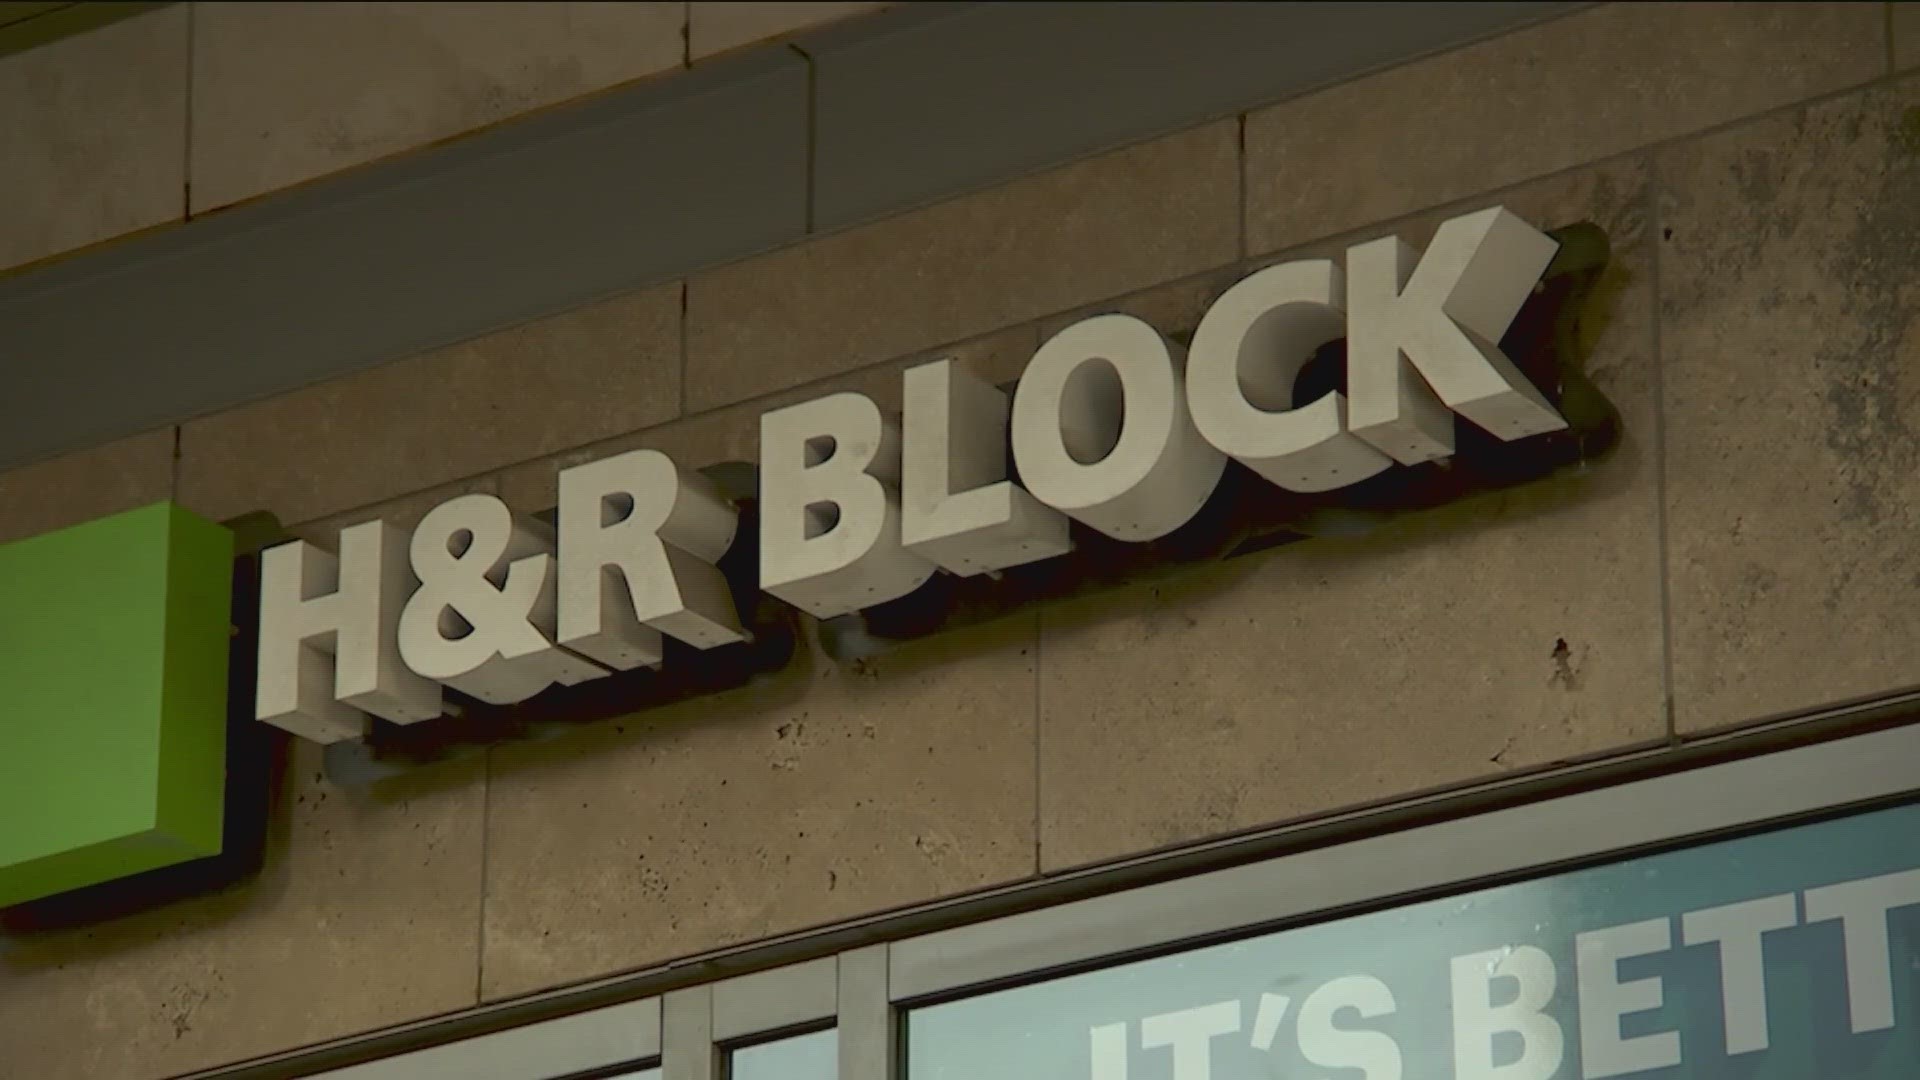 People using the online version of the tax prep software, which H&R Block said is the vast majority of its customers, were unaffected.